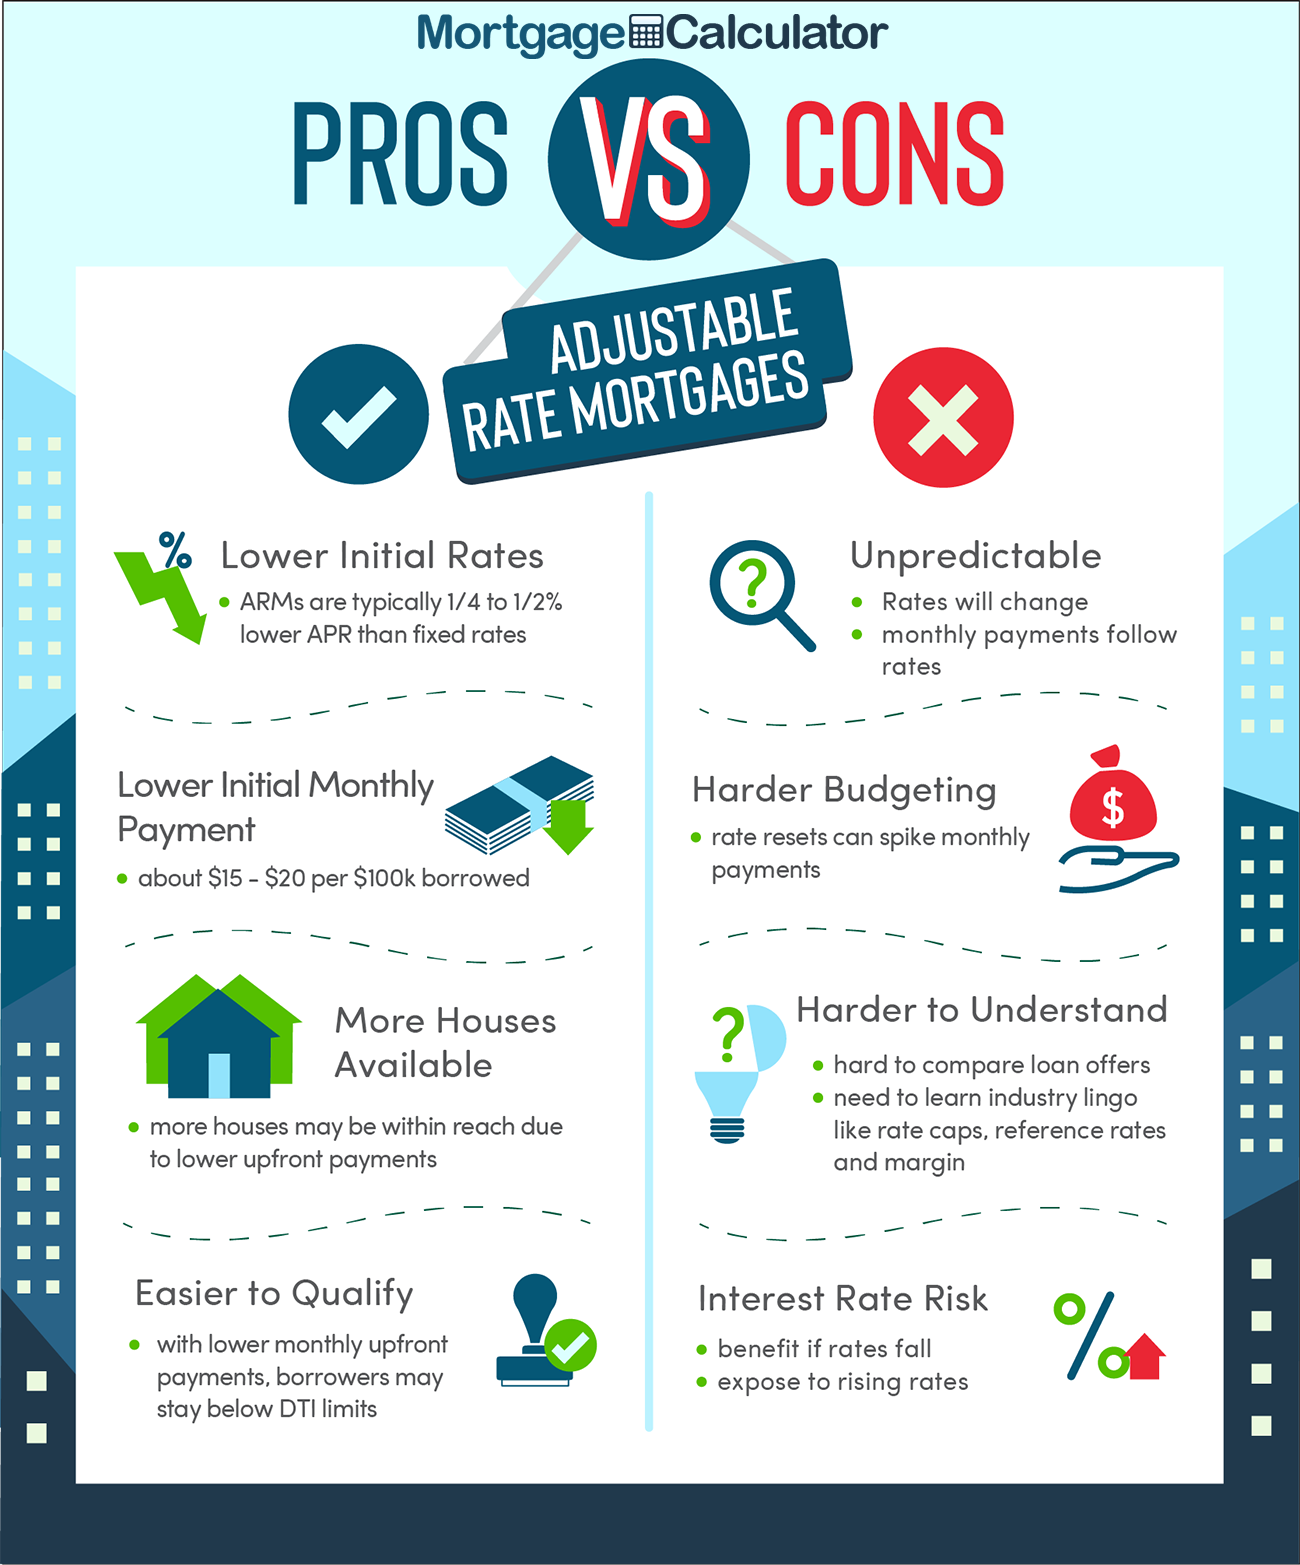 What Are The Pros And Cons Of Recasting A Mortgage Loan?